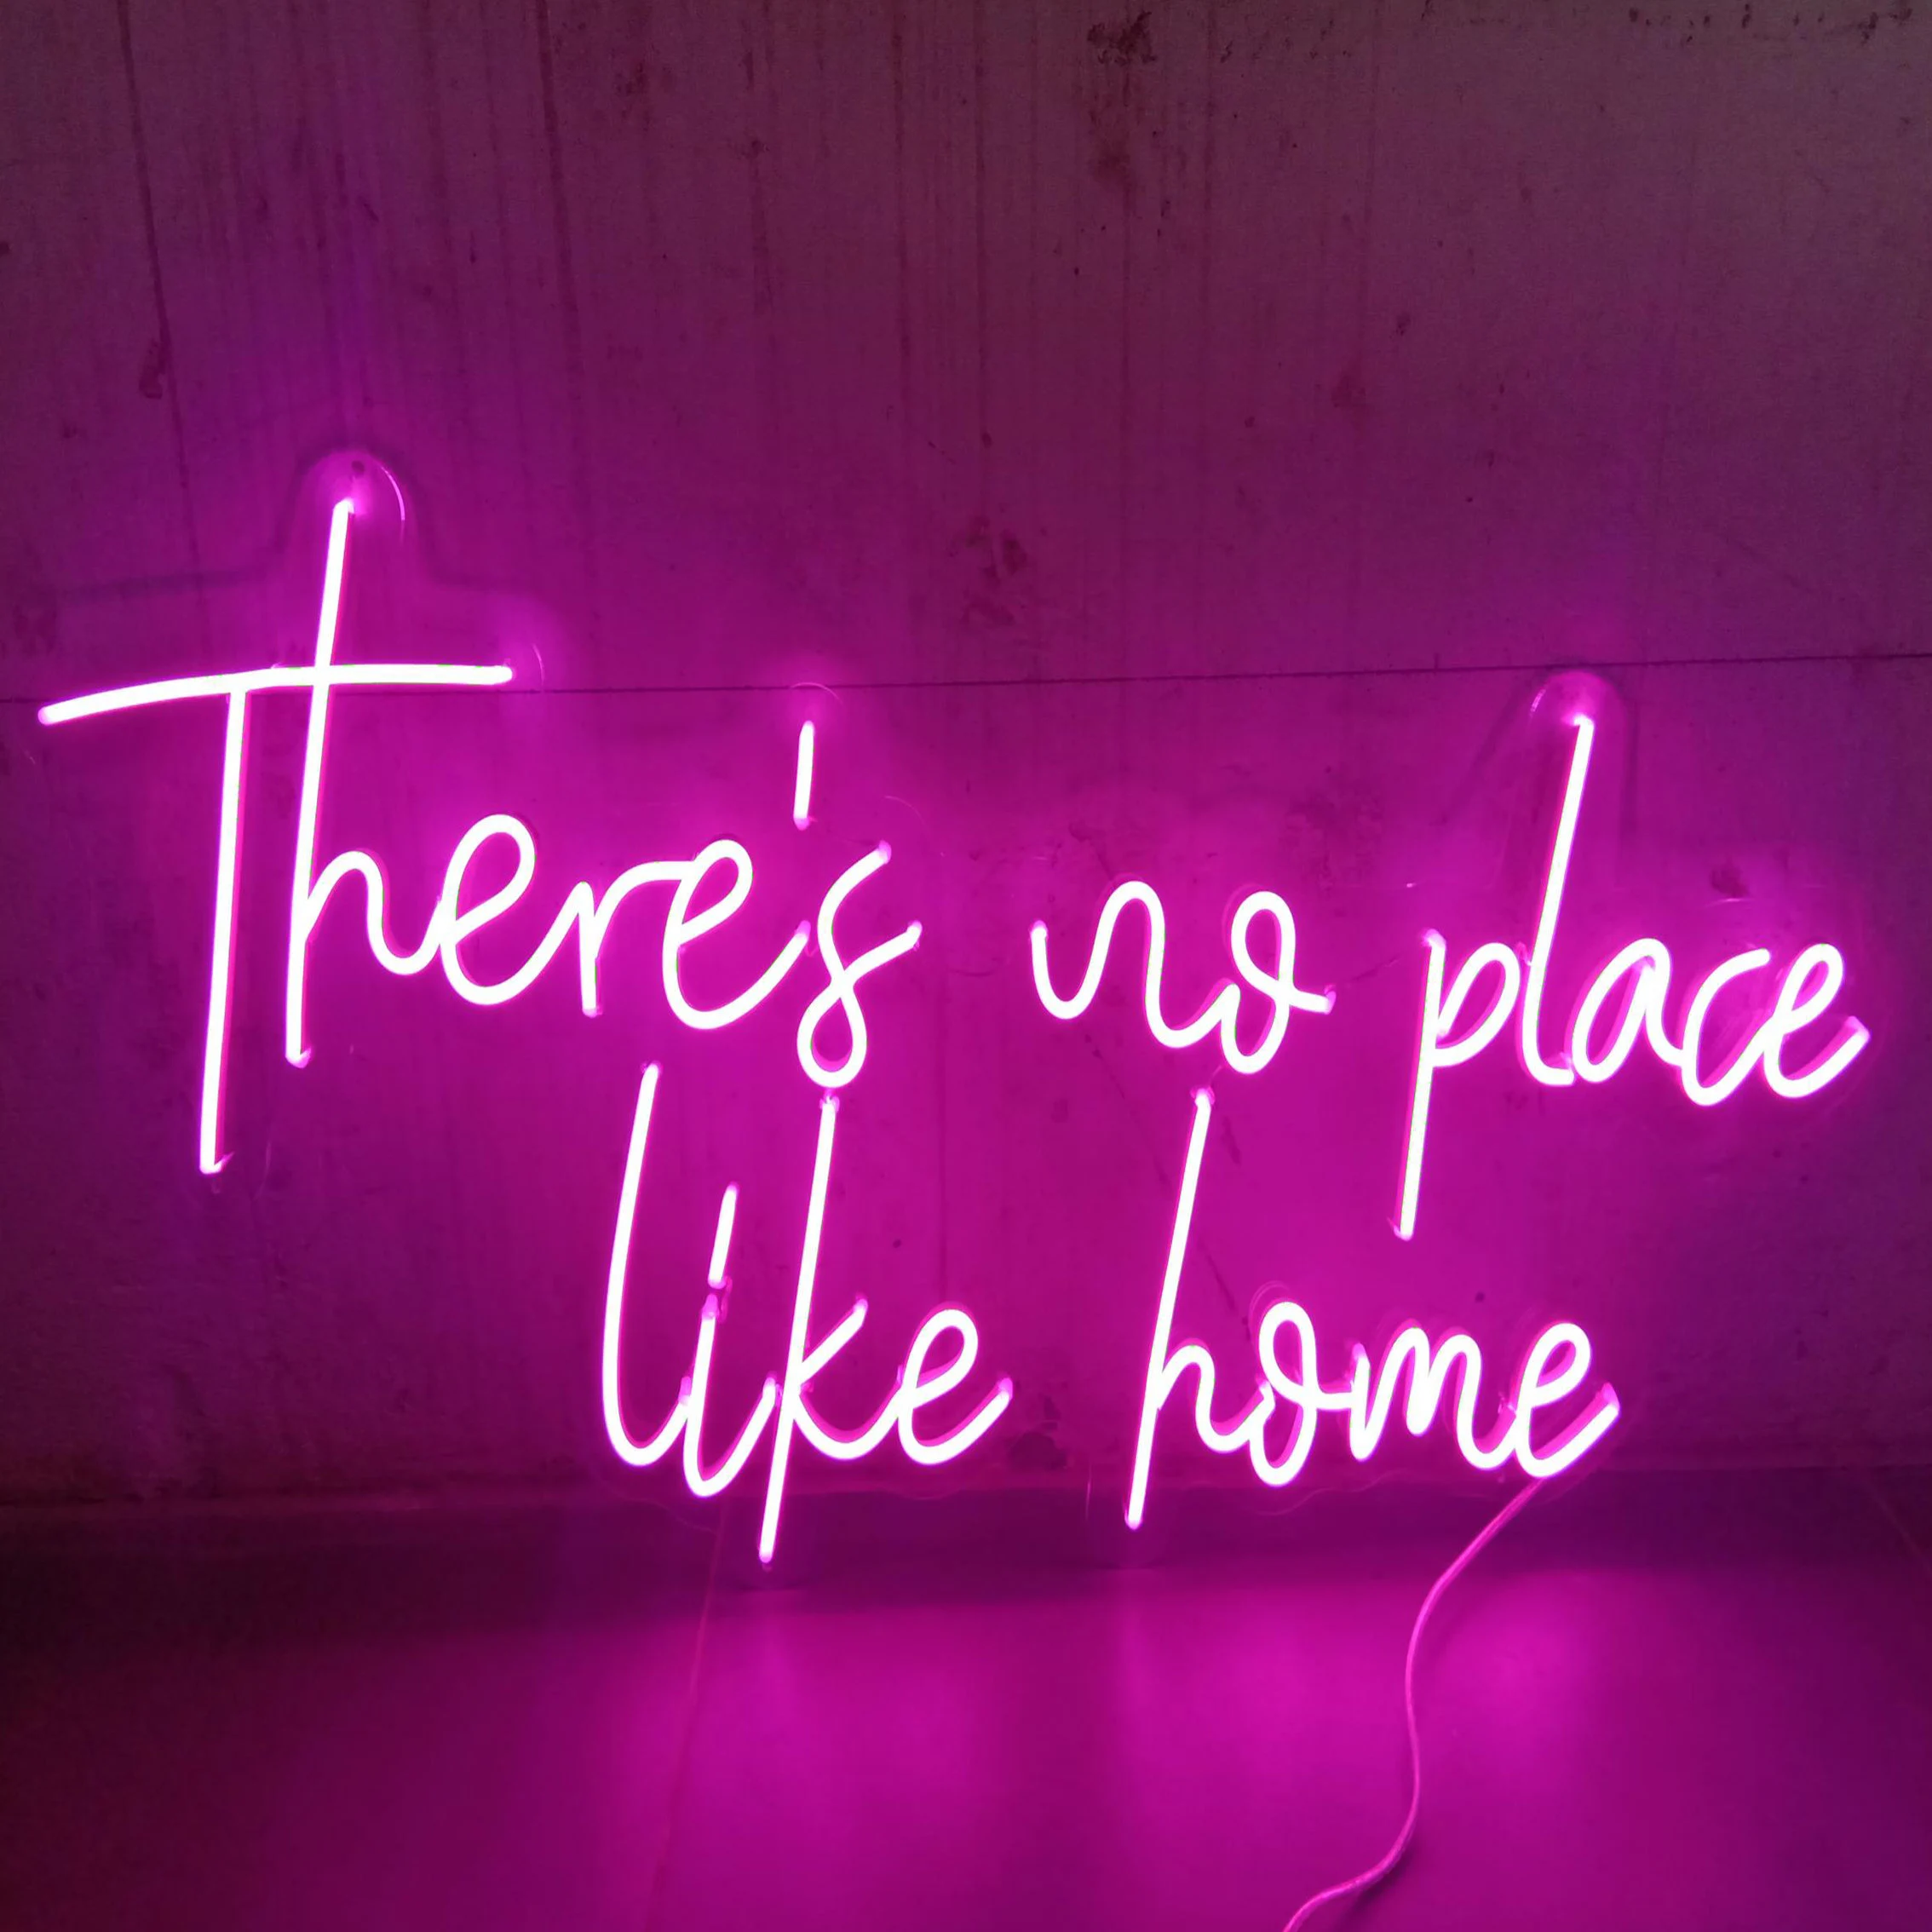 There's no place like home neon sign